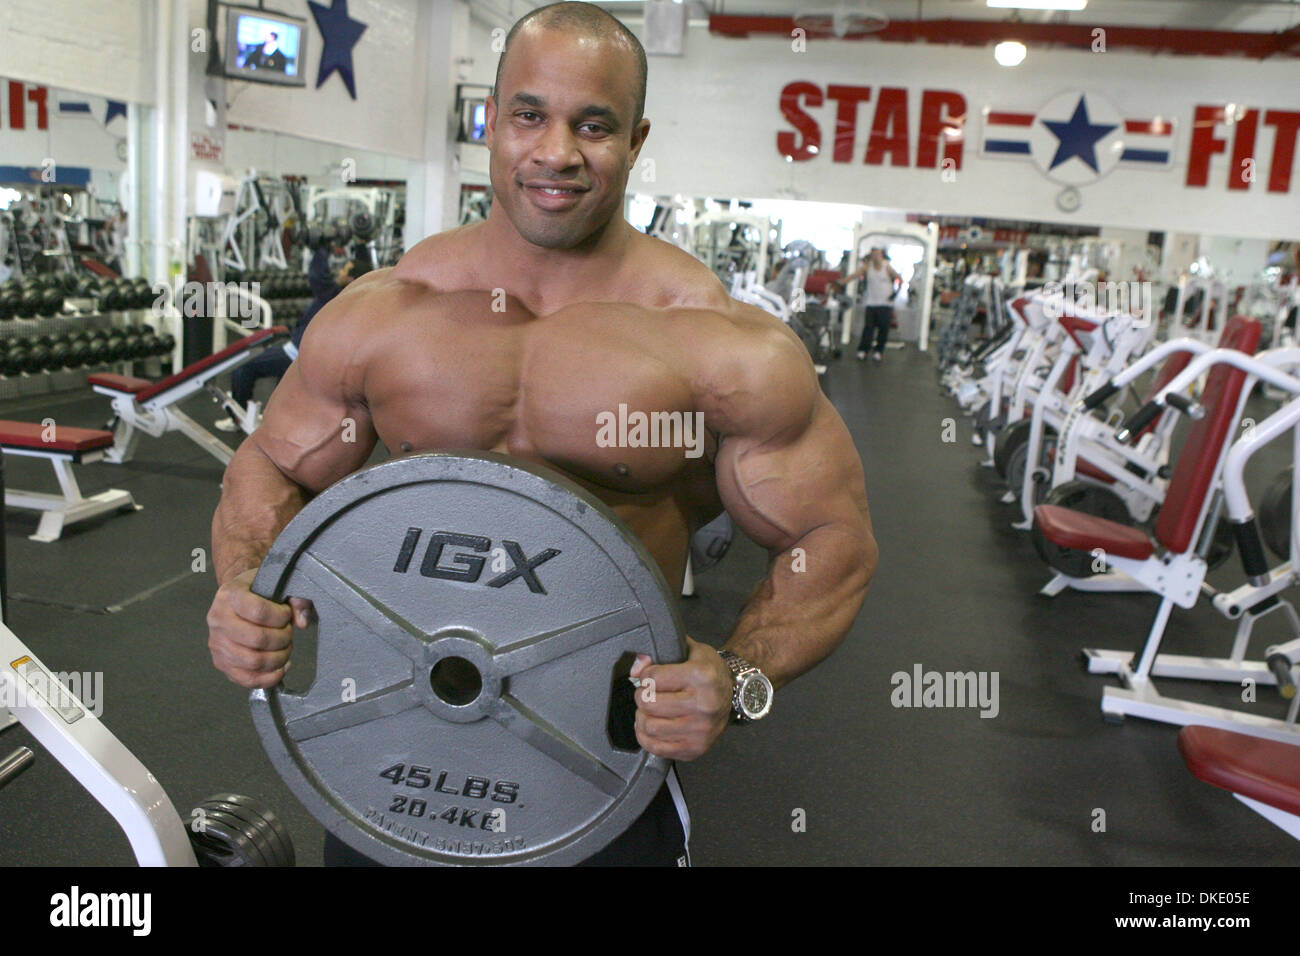 Apr 26, 2007 - New York, NY, USA - Body builder VICTOR MARTINEZ, 33, of  Manhattan who won the 2007 'Arnold Classic' in Ohio, is photographed at Star  Fitness gym at 1385